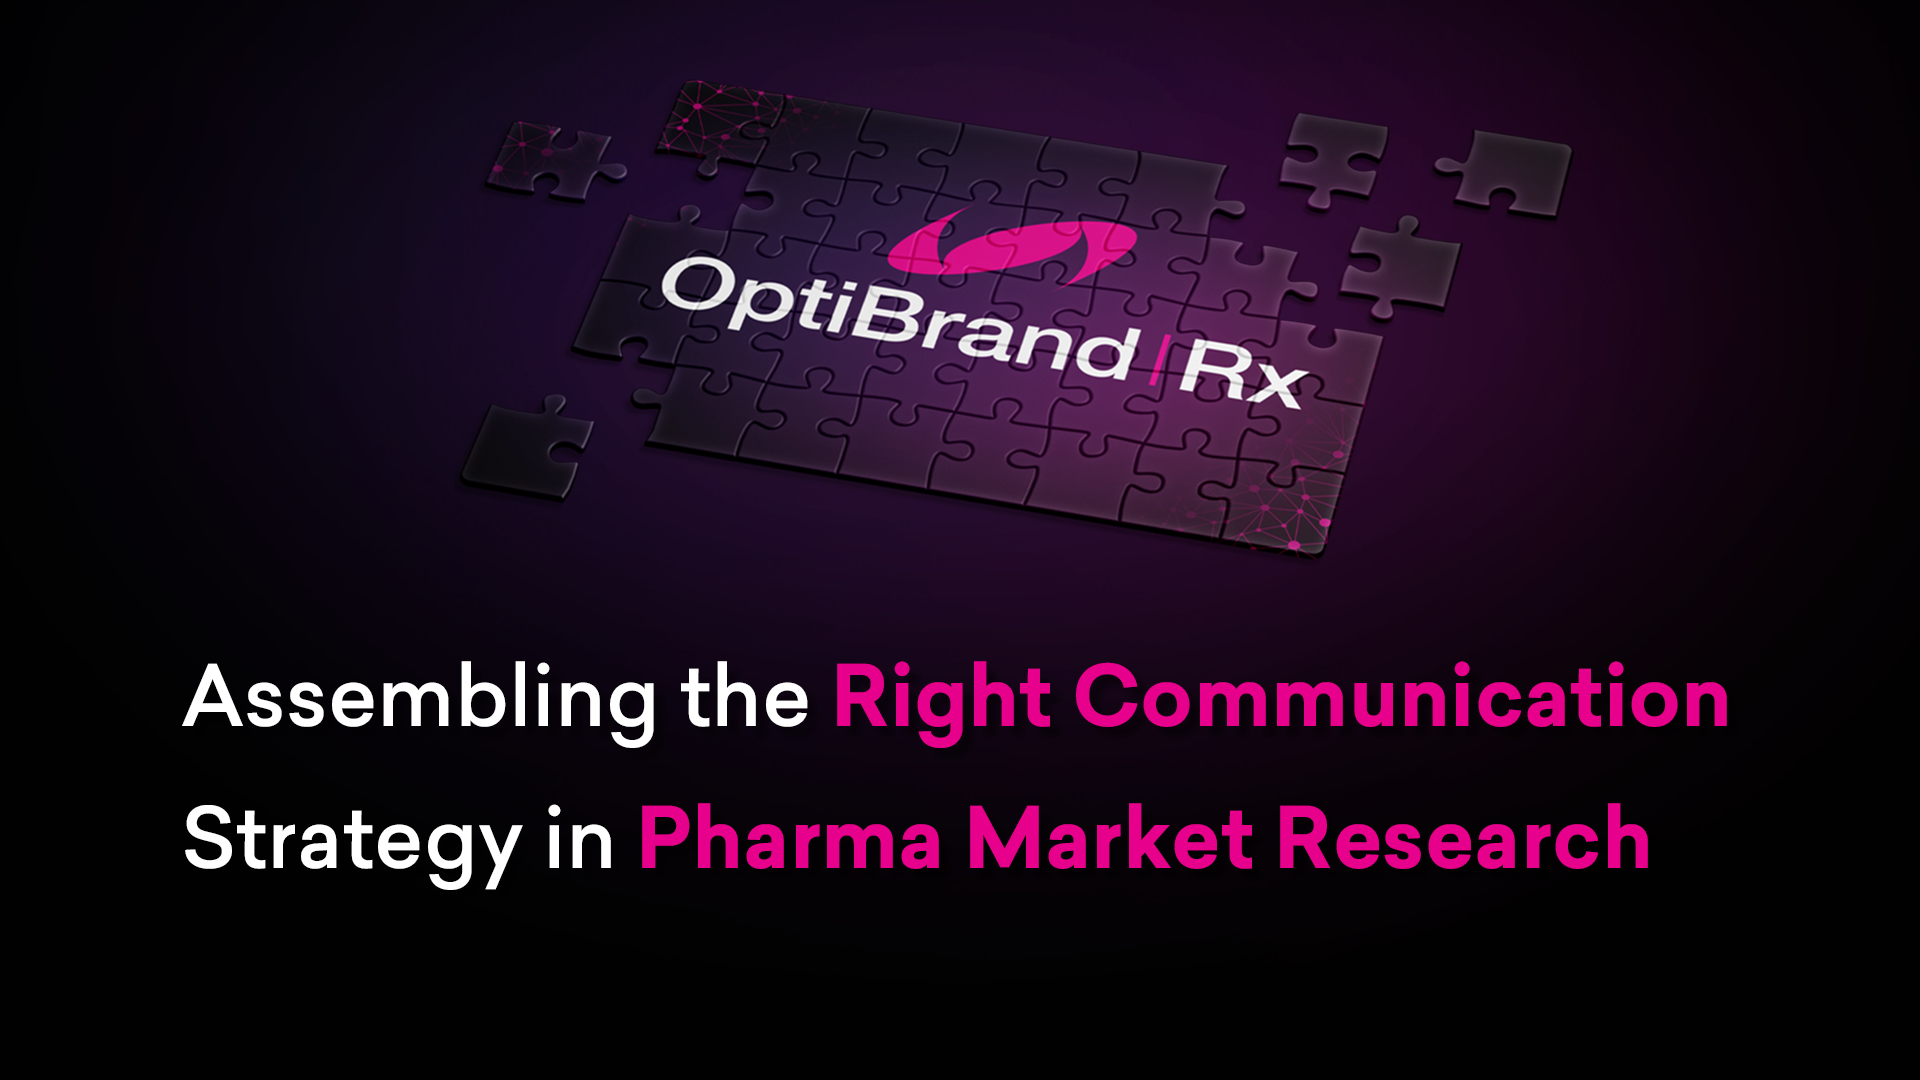 OptiBrand Rx. Assembling the Right Communication Strategy in Pharma Market Research.